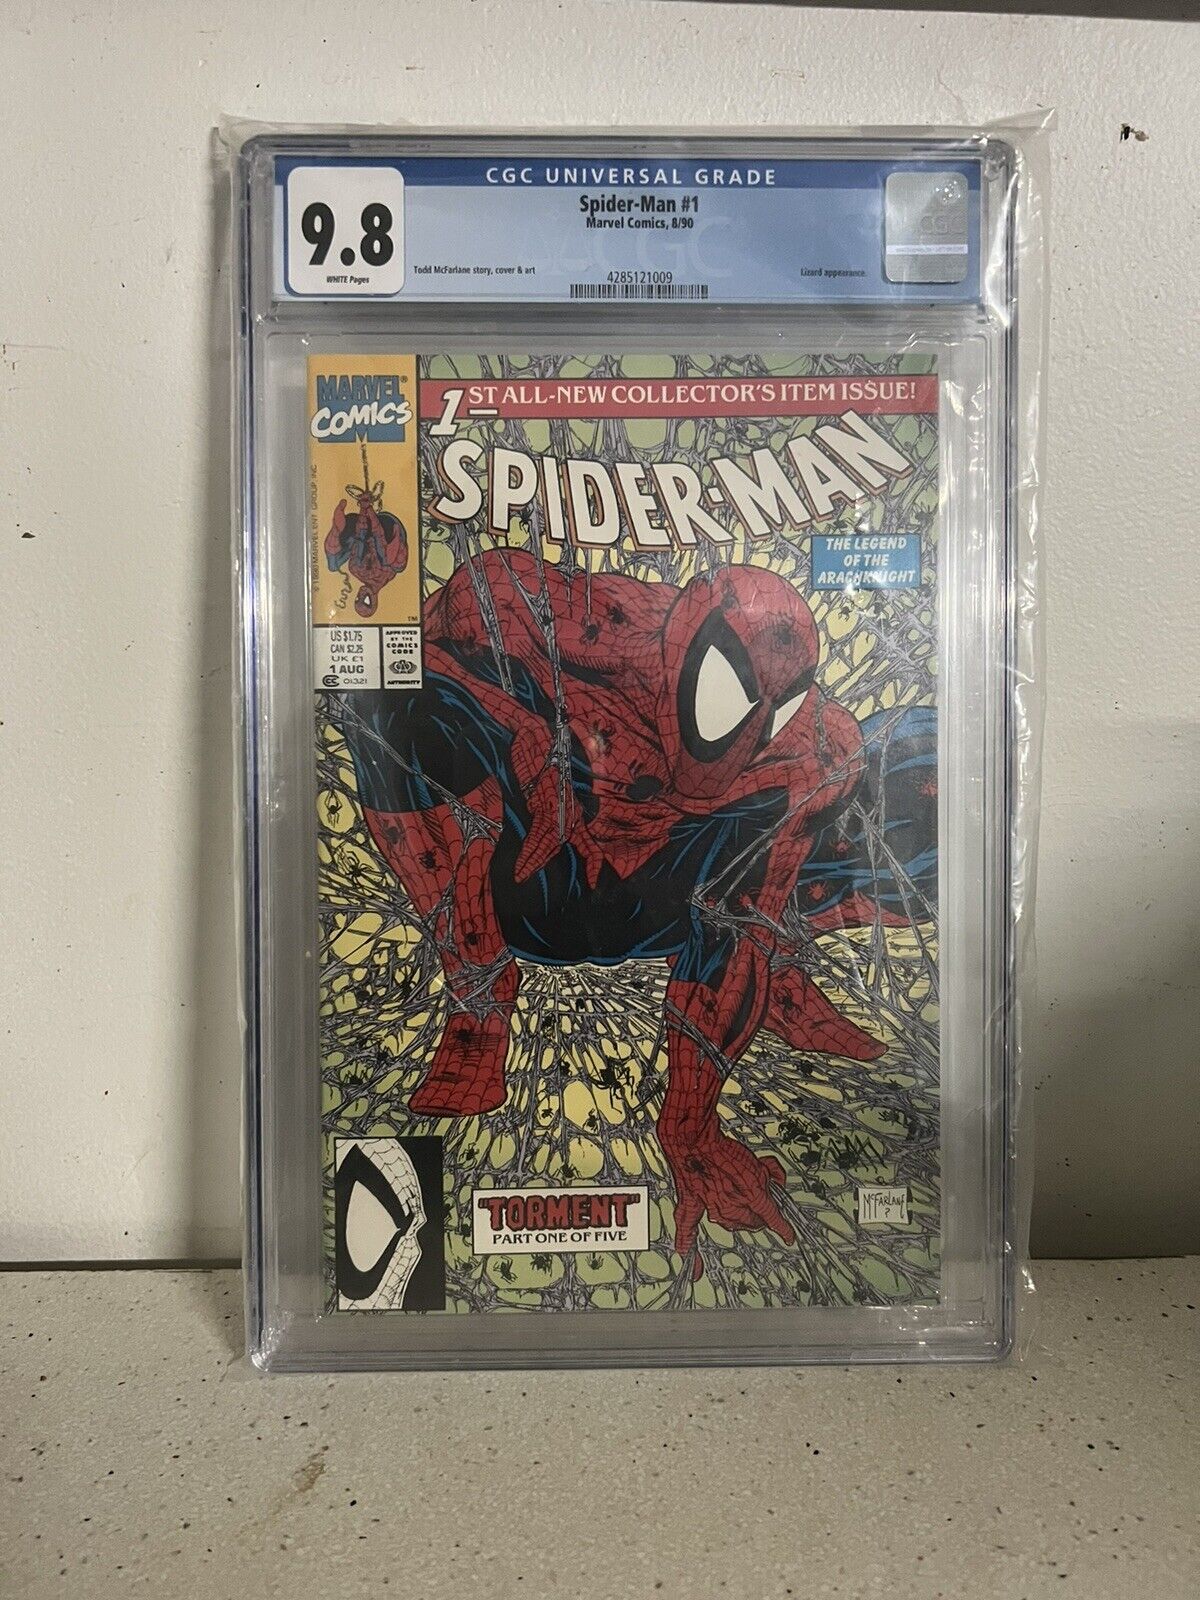 Spider-Man # 1 CGC 9.8 Todd McFarlane Story Cover And Art, Custom NYC Label 